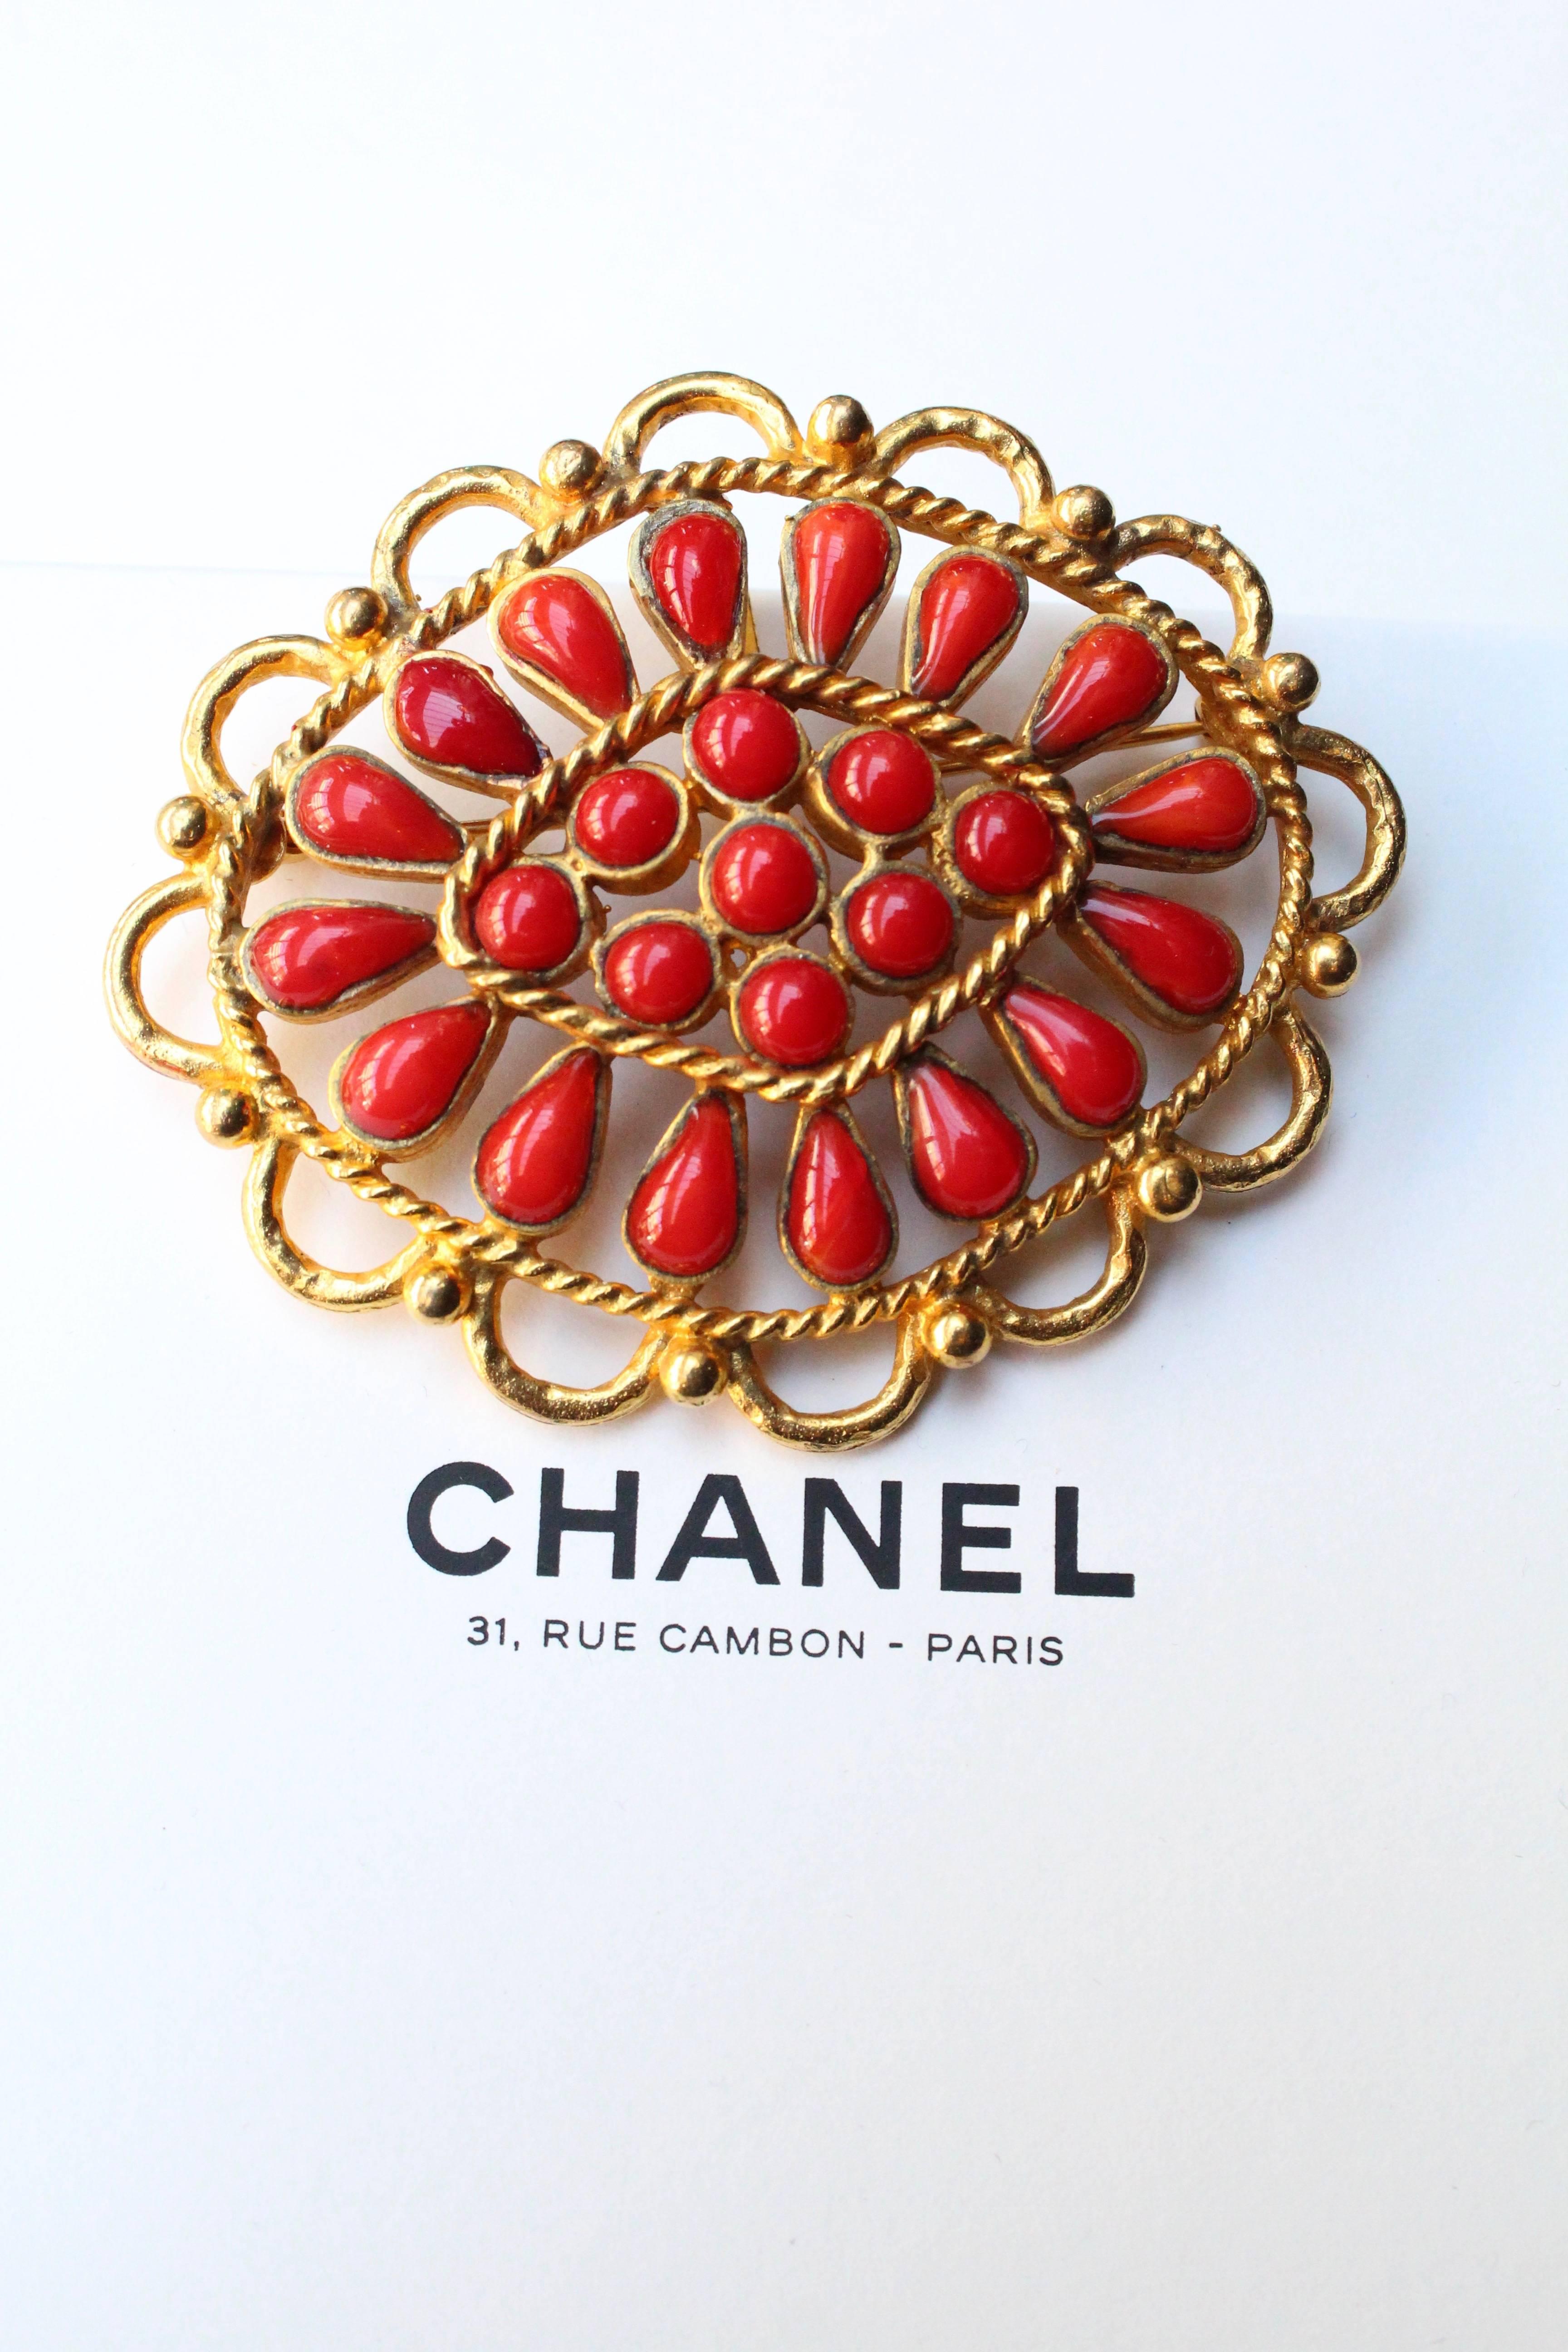 CHANEL (Made in France) Rare example of a gorgeous oval brooch composed of ruby red glass paste cabochons in the shape of tear drops set in gilded metal. It can also be worn as a pendant, thanks to a back hook.

Beautiful work from Maison Gripoix